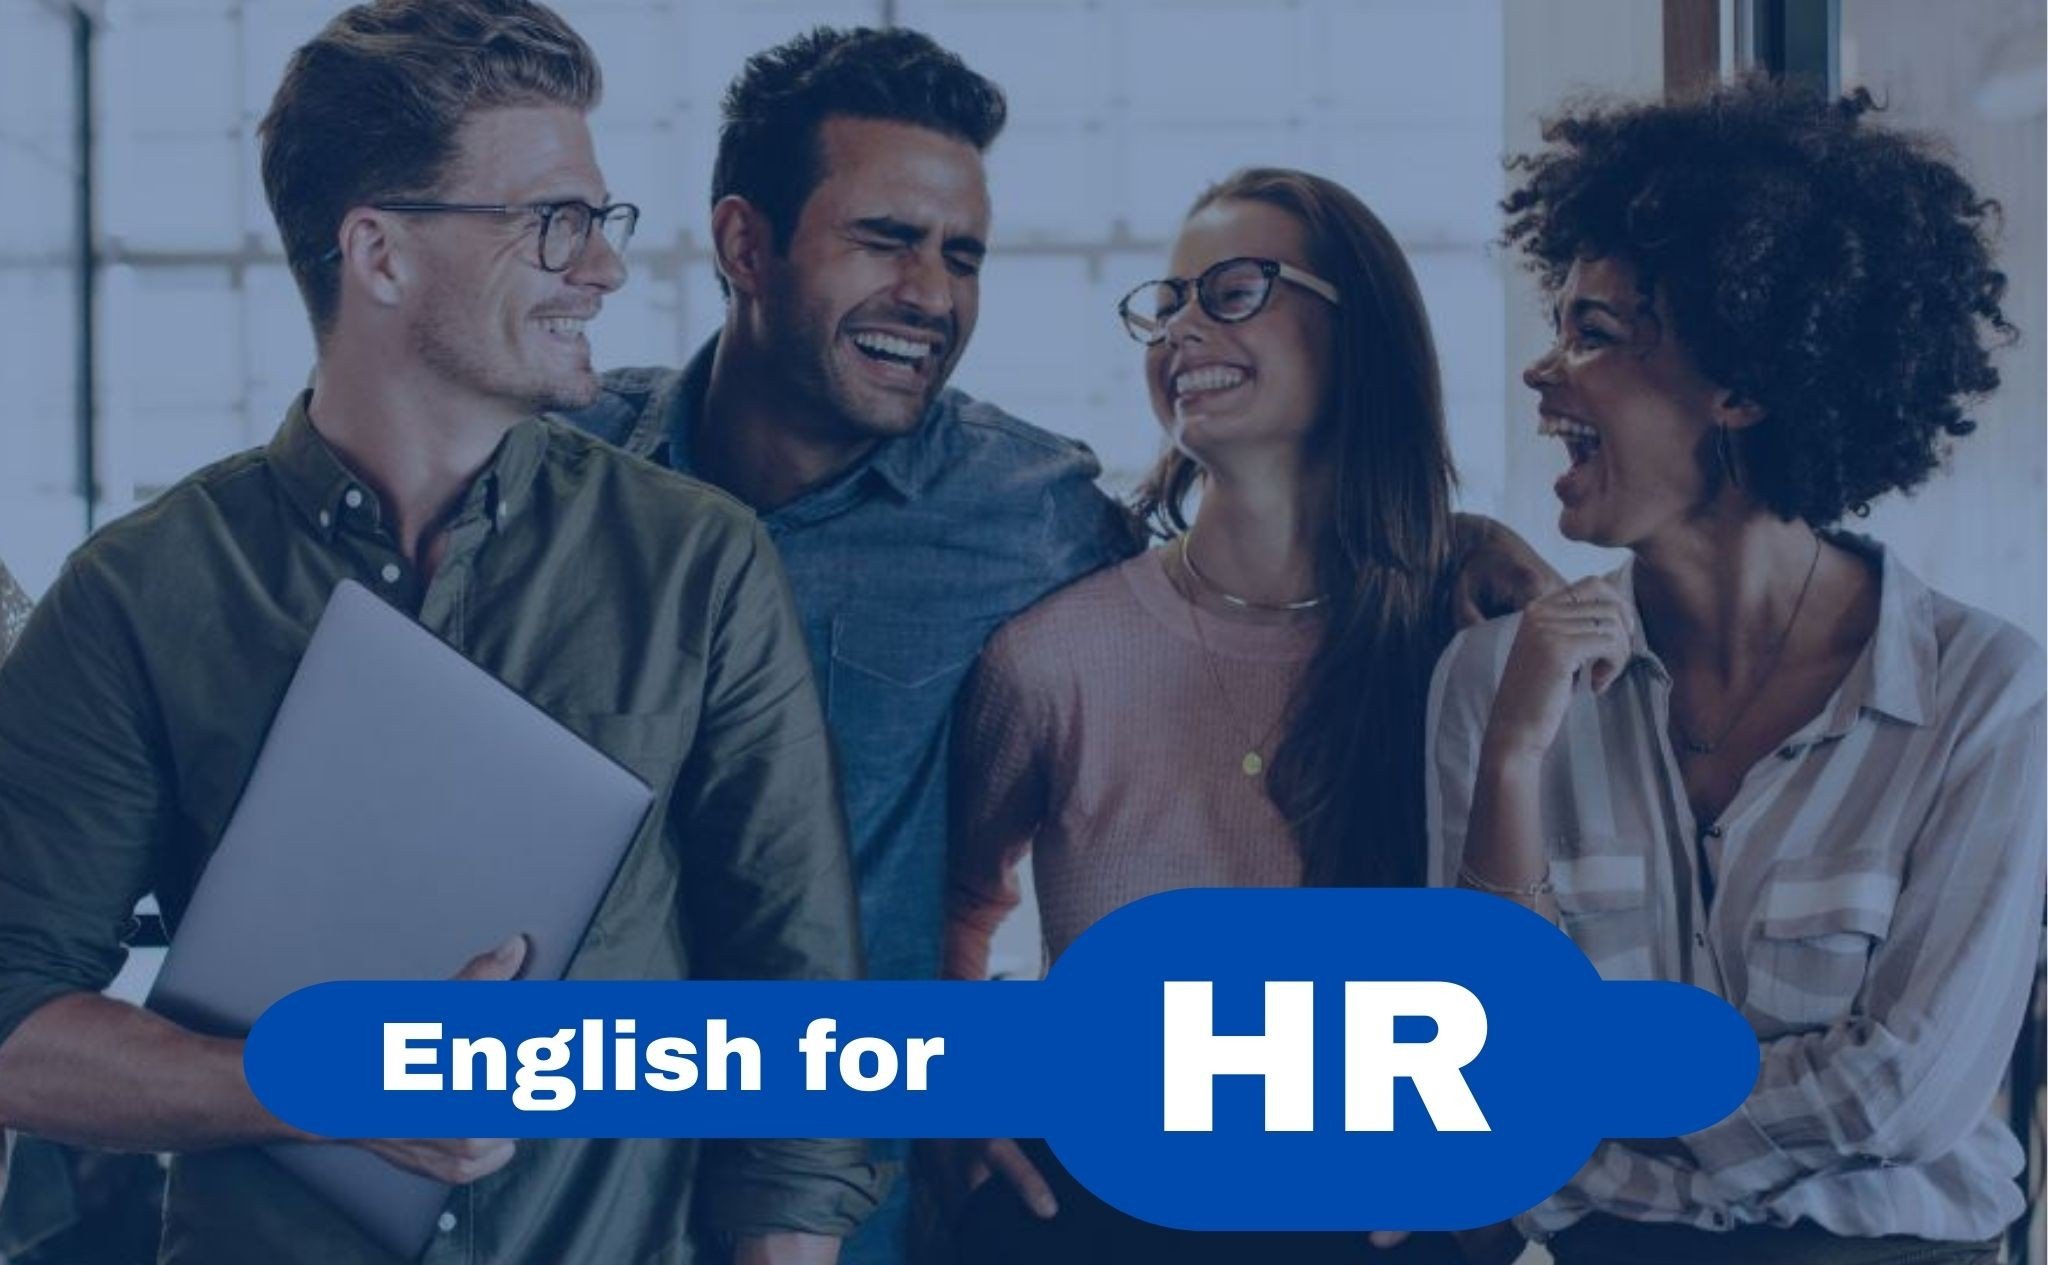 A global team of HR managers discussing human resources issues in English.